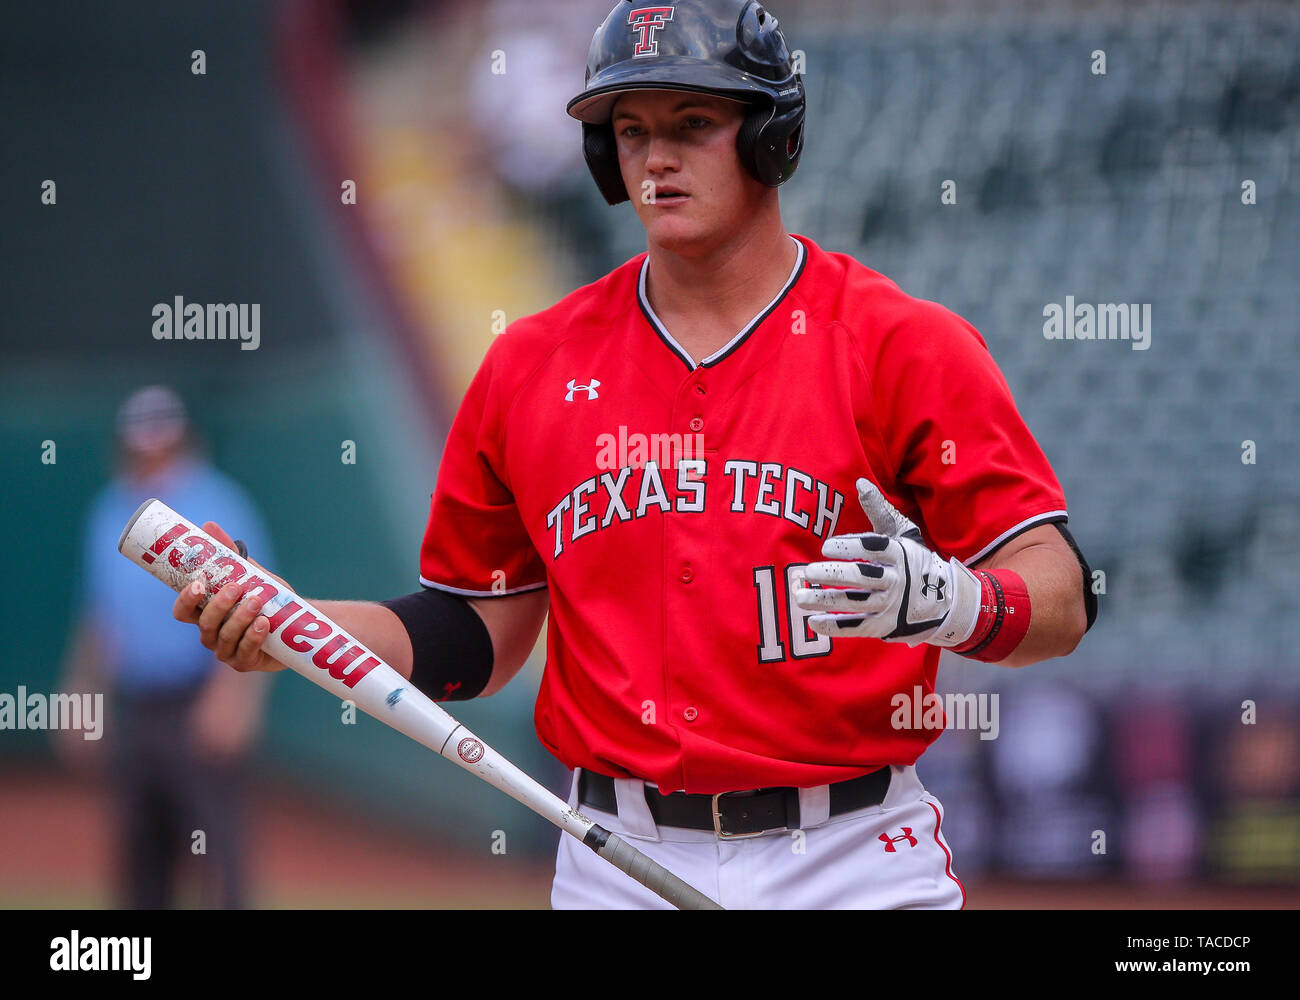 Oklahoma City, OK, USA. 23rd May, 2019. Texas Tech infielder Josh Jung (16)  at bat during a 2019 Phillips 66 Big 12 Baseball Championship second round  game between the West Virginia Mountaineers